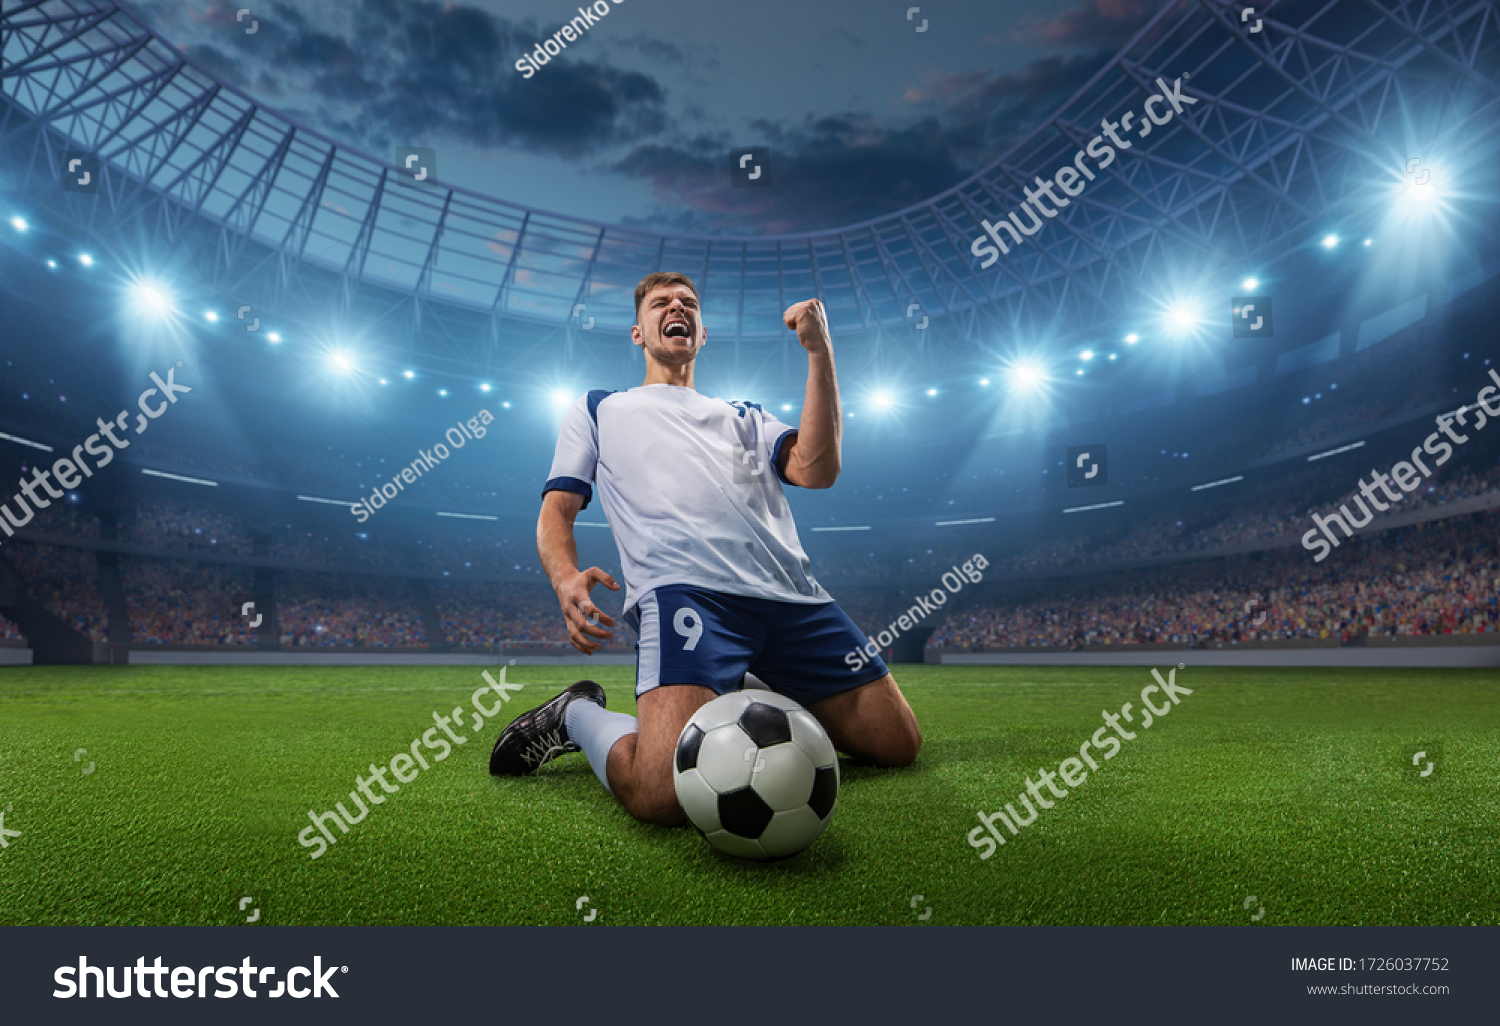 Happy Players Soccer Images Stock Photos Vectors Shutterstock